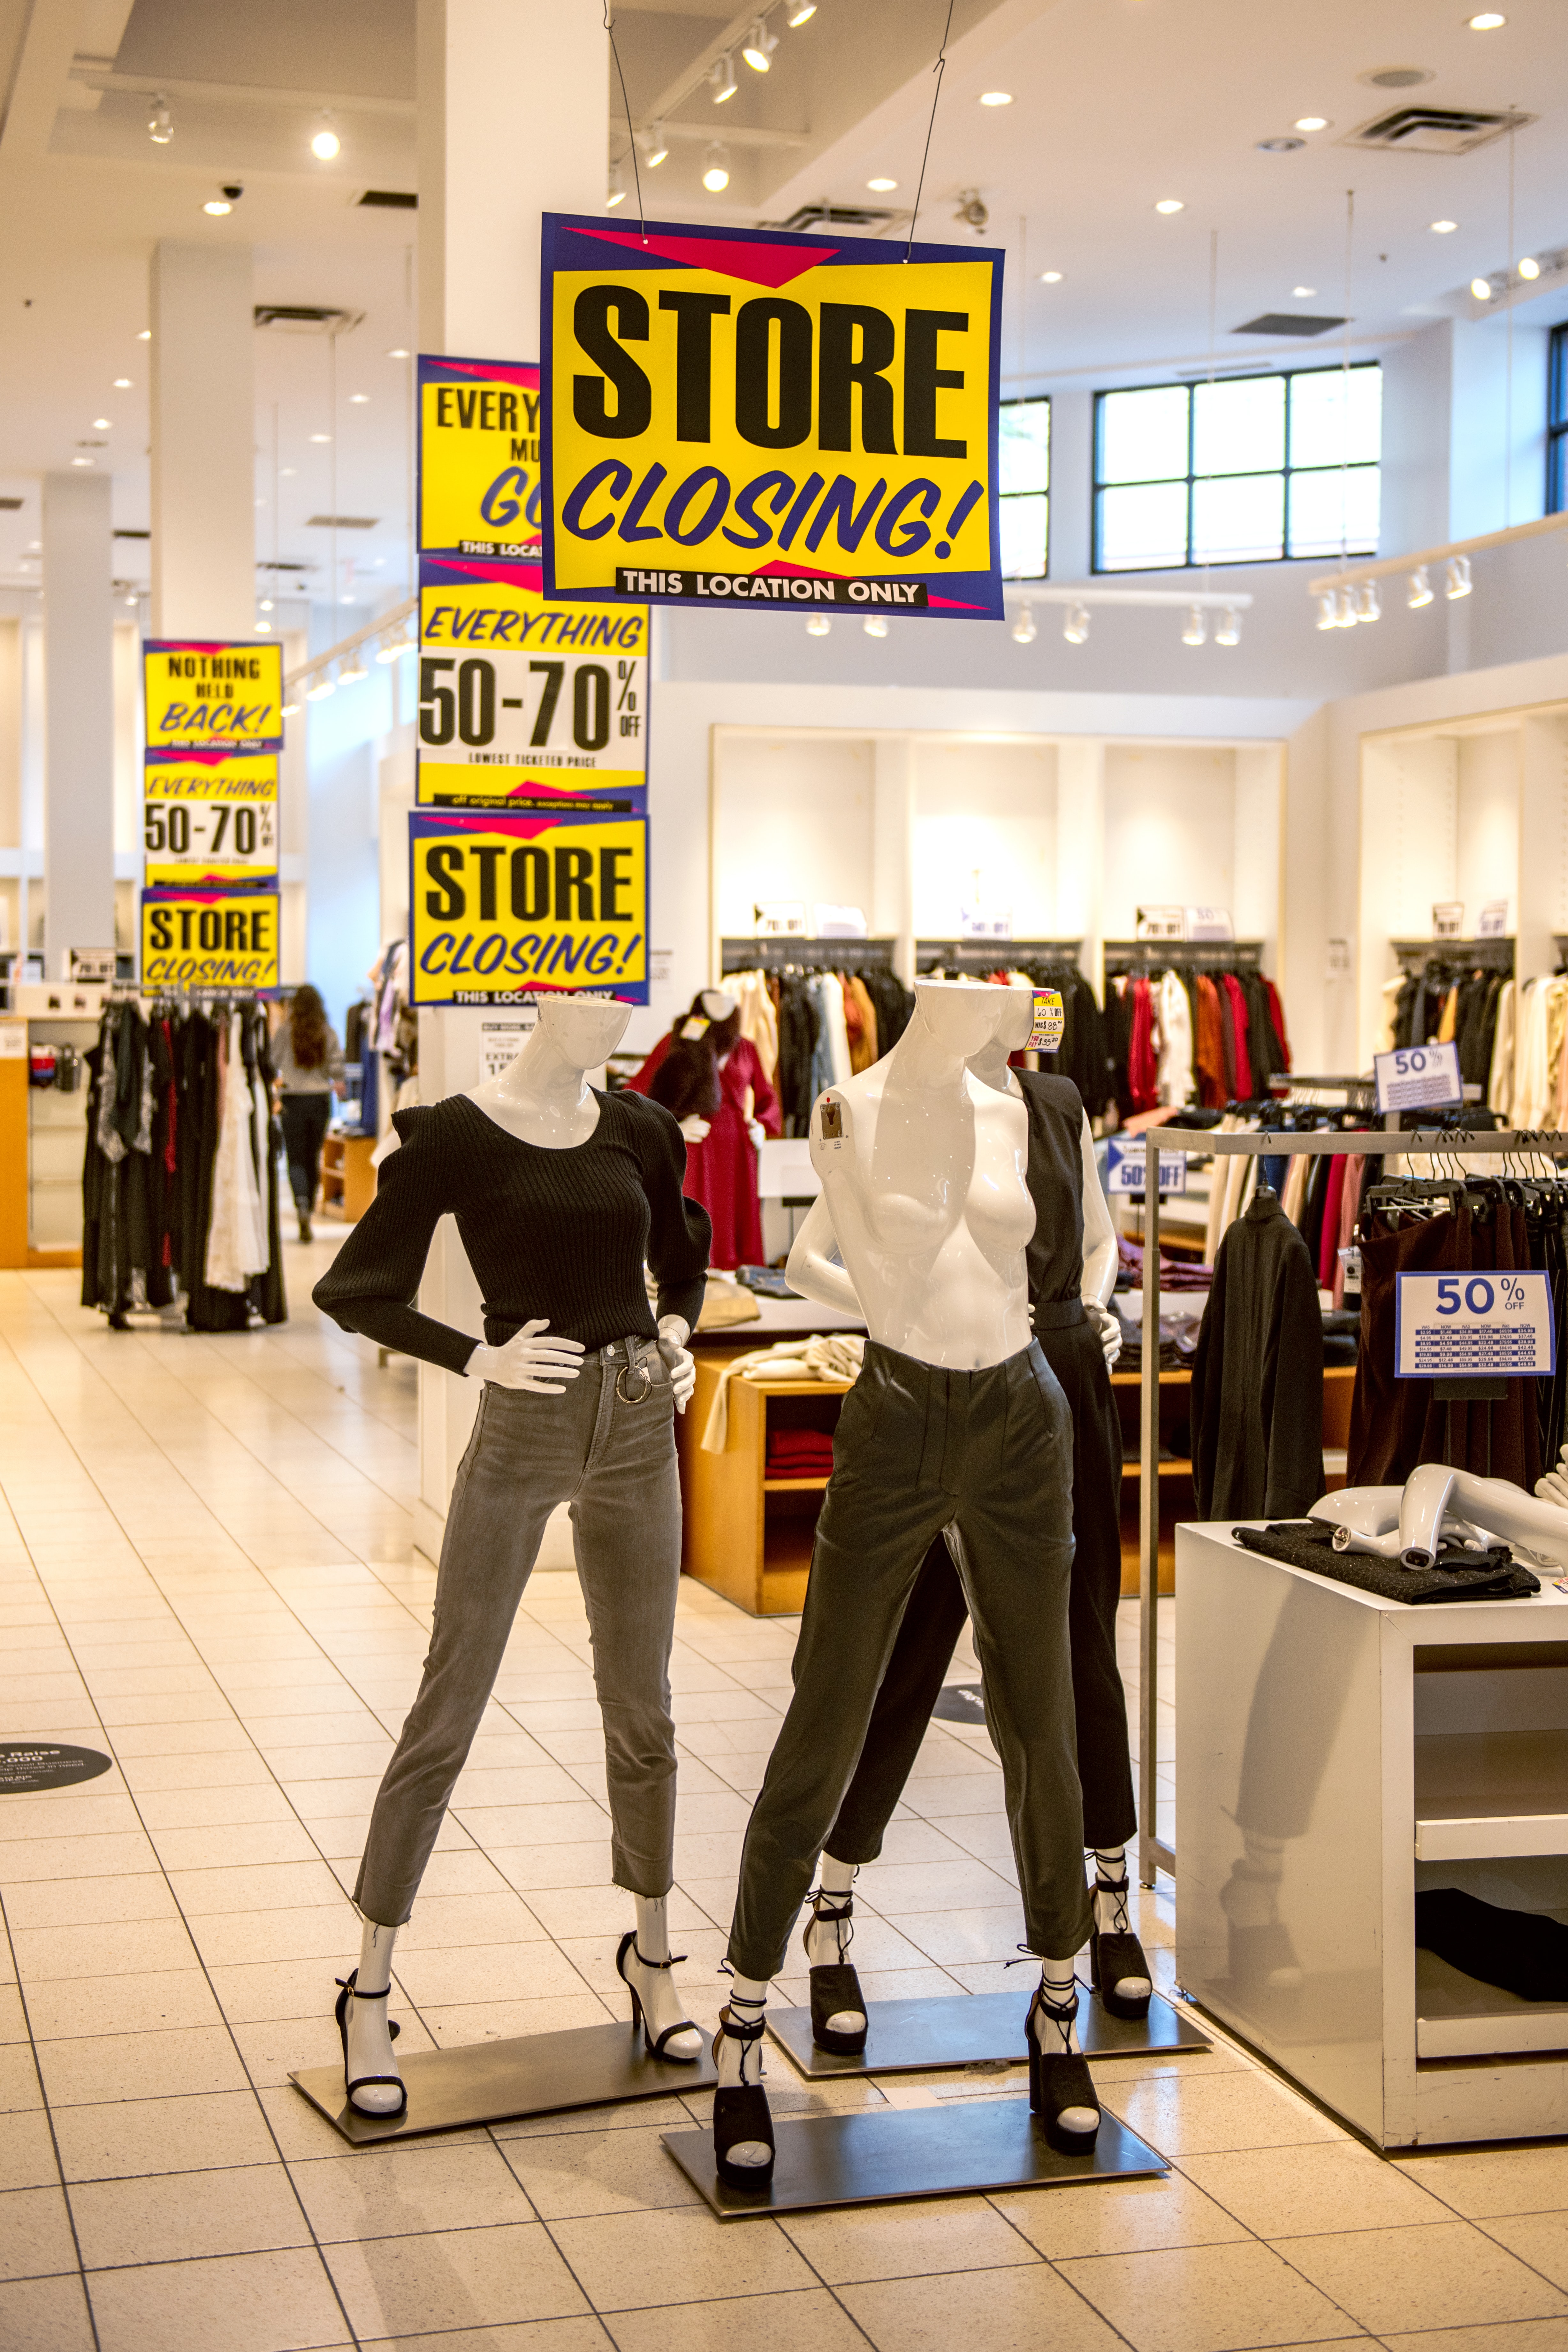 retail stores have closed as a result of the pandemic